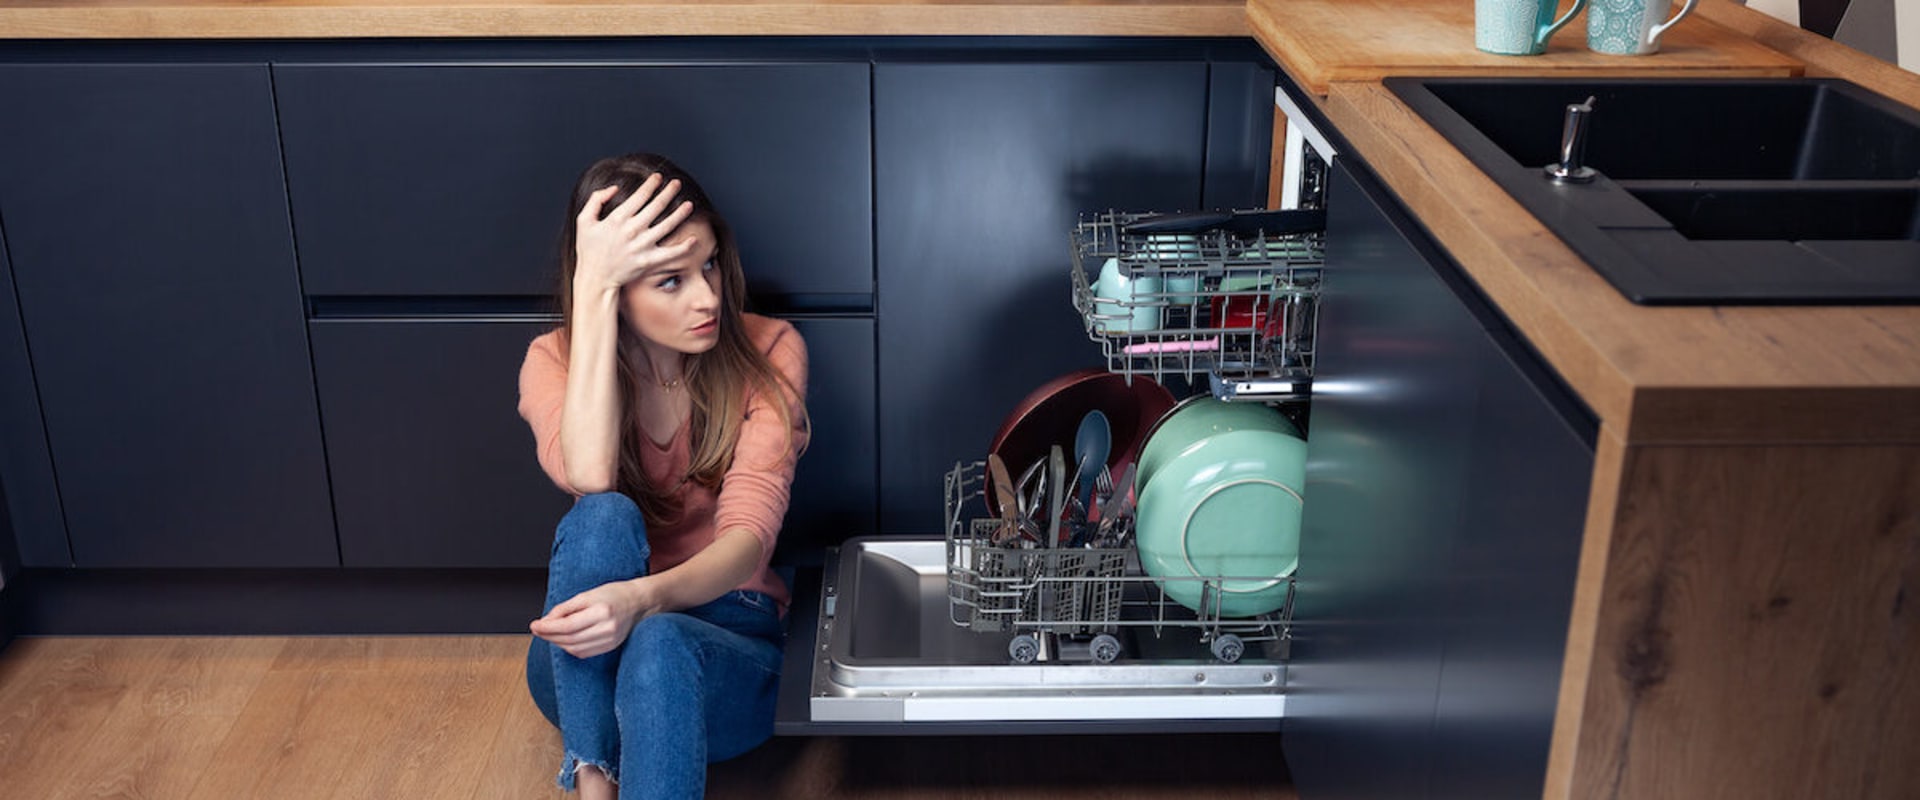 What are the most common appliance repair problems?